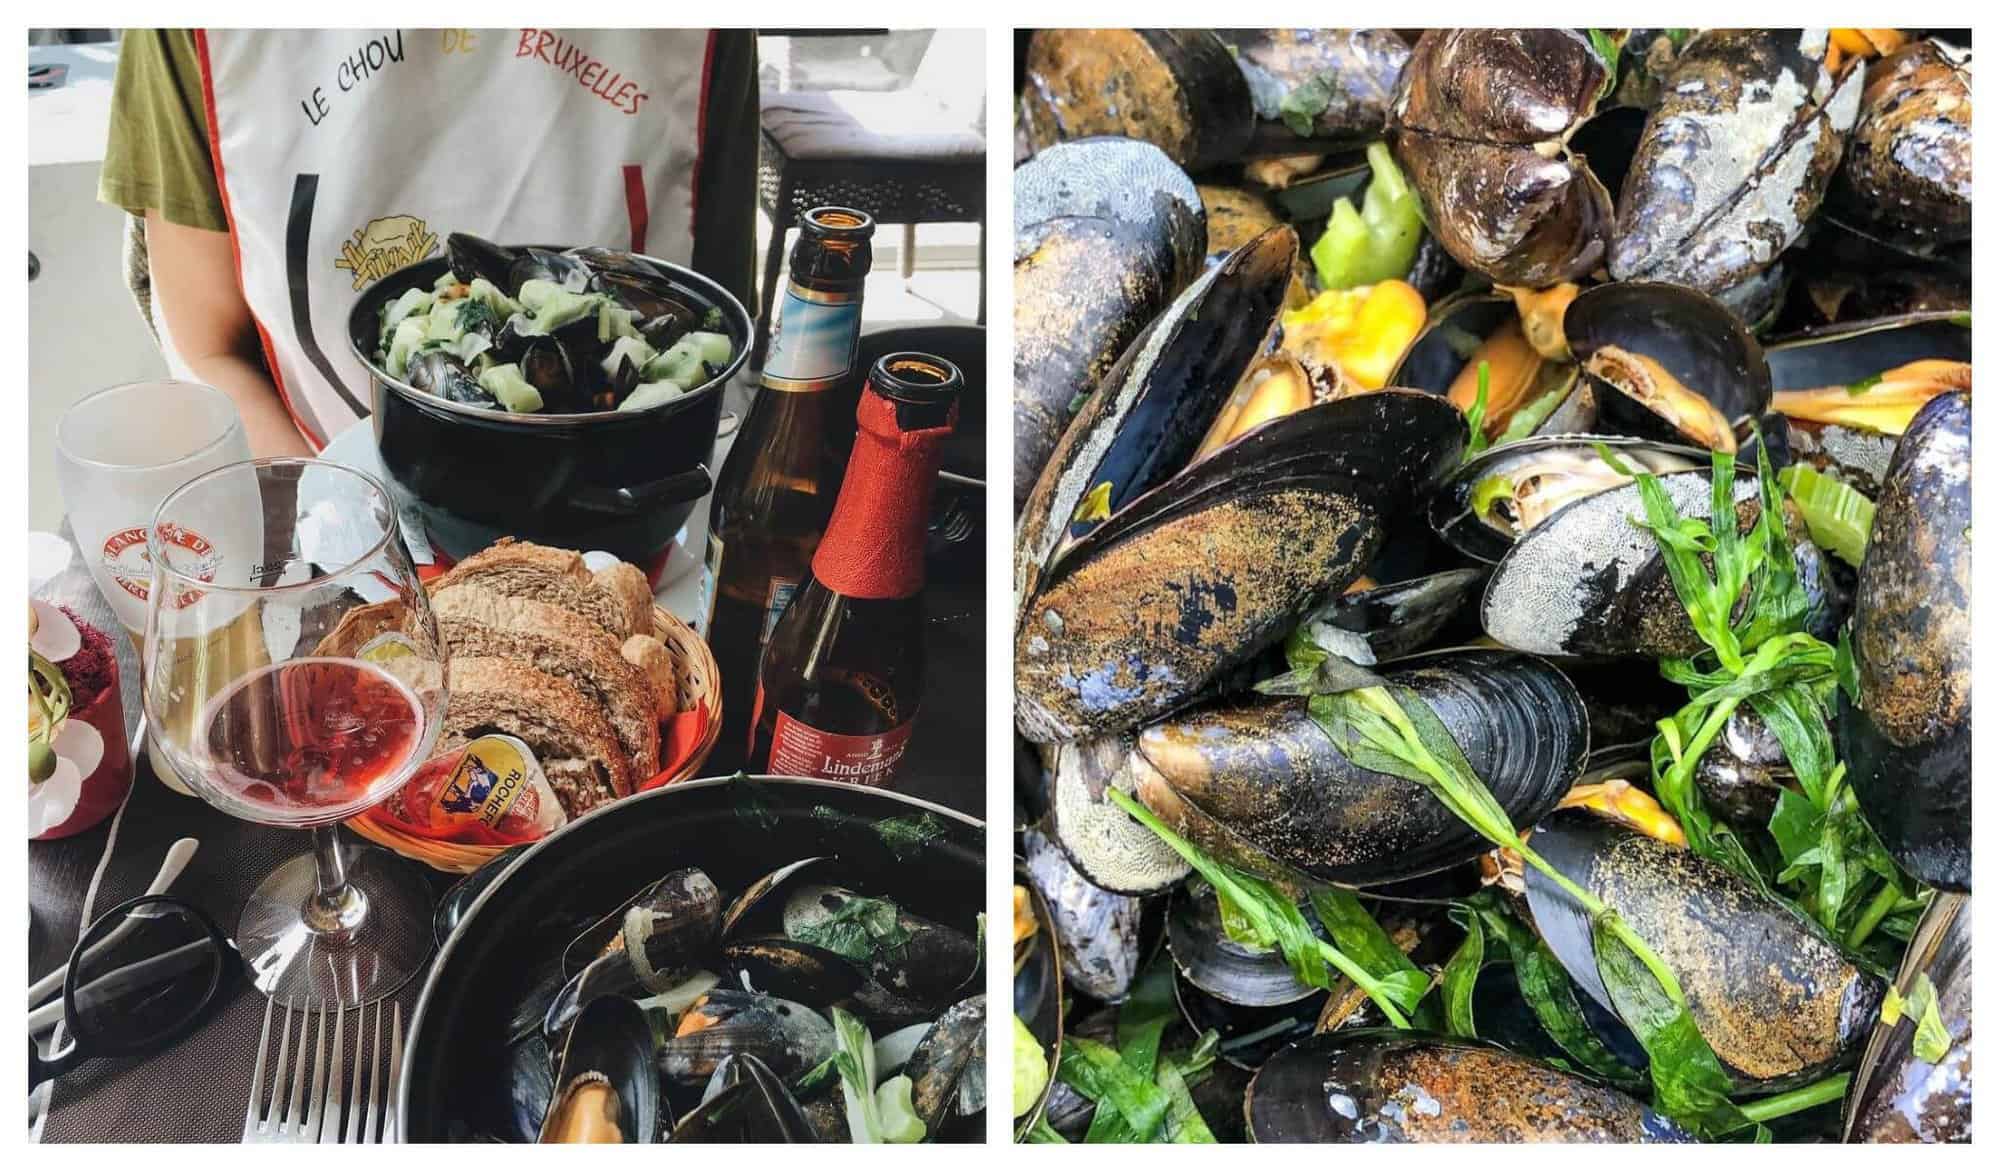 Left: Two portions of moules frites are pictured alongside a beer and red wine Right: Moules from Le Chou de Bruxelles are covered in a garlic and herb dressing, and pictured up-close